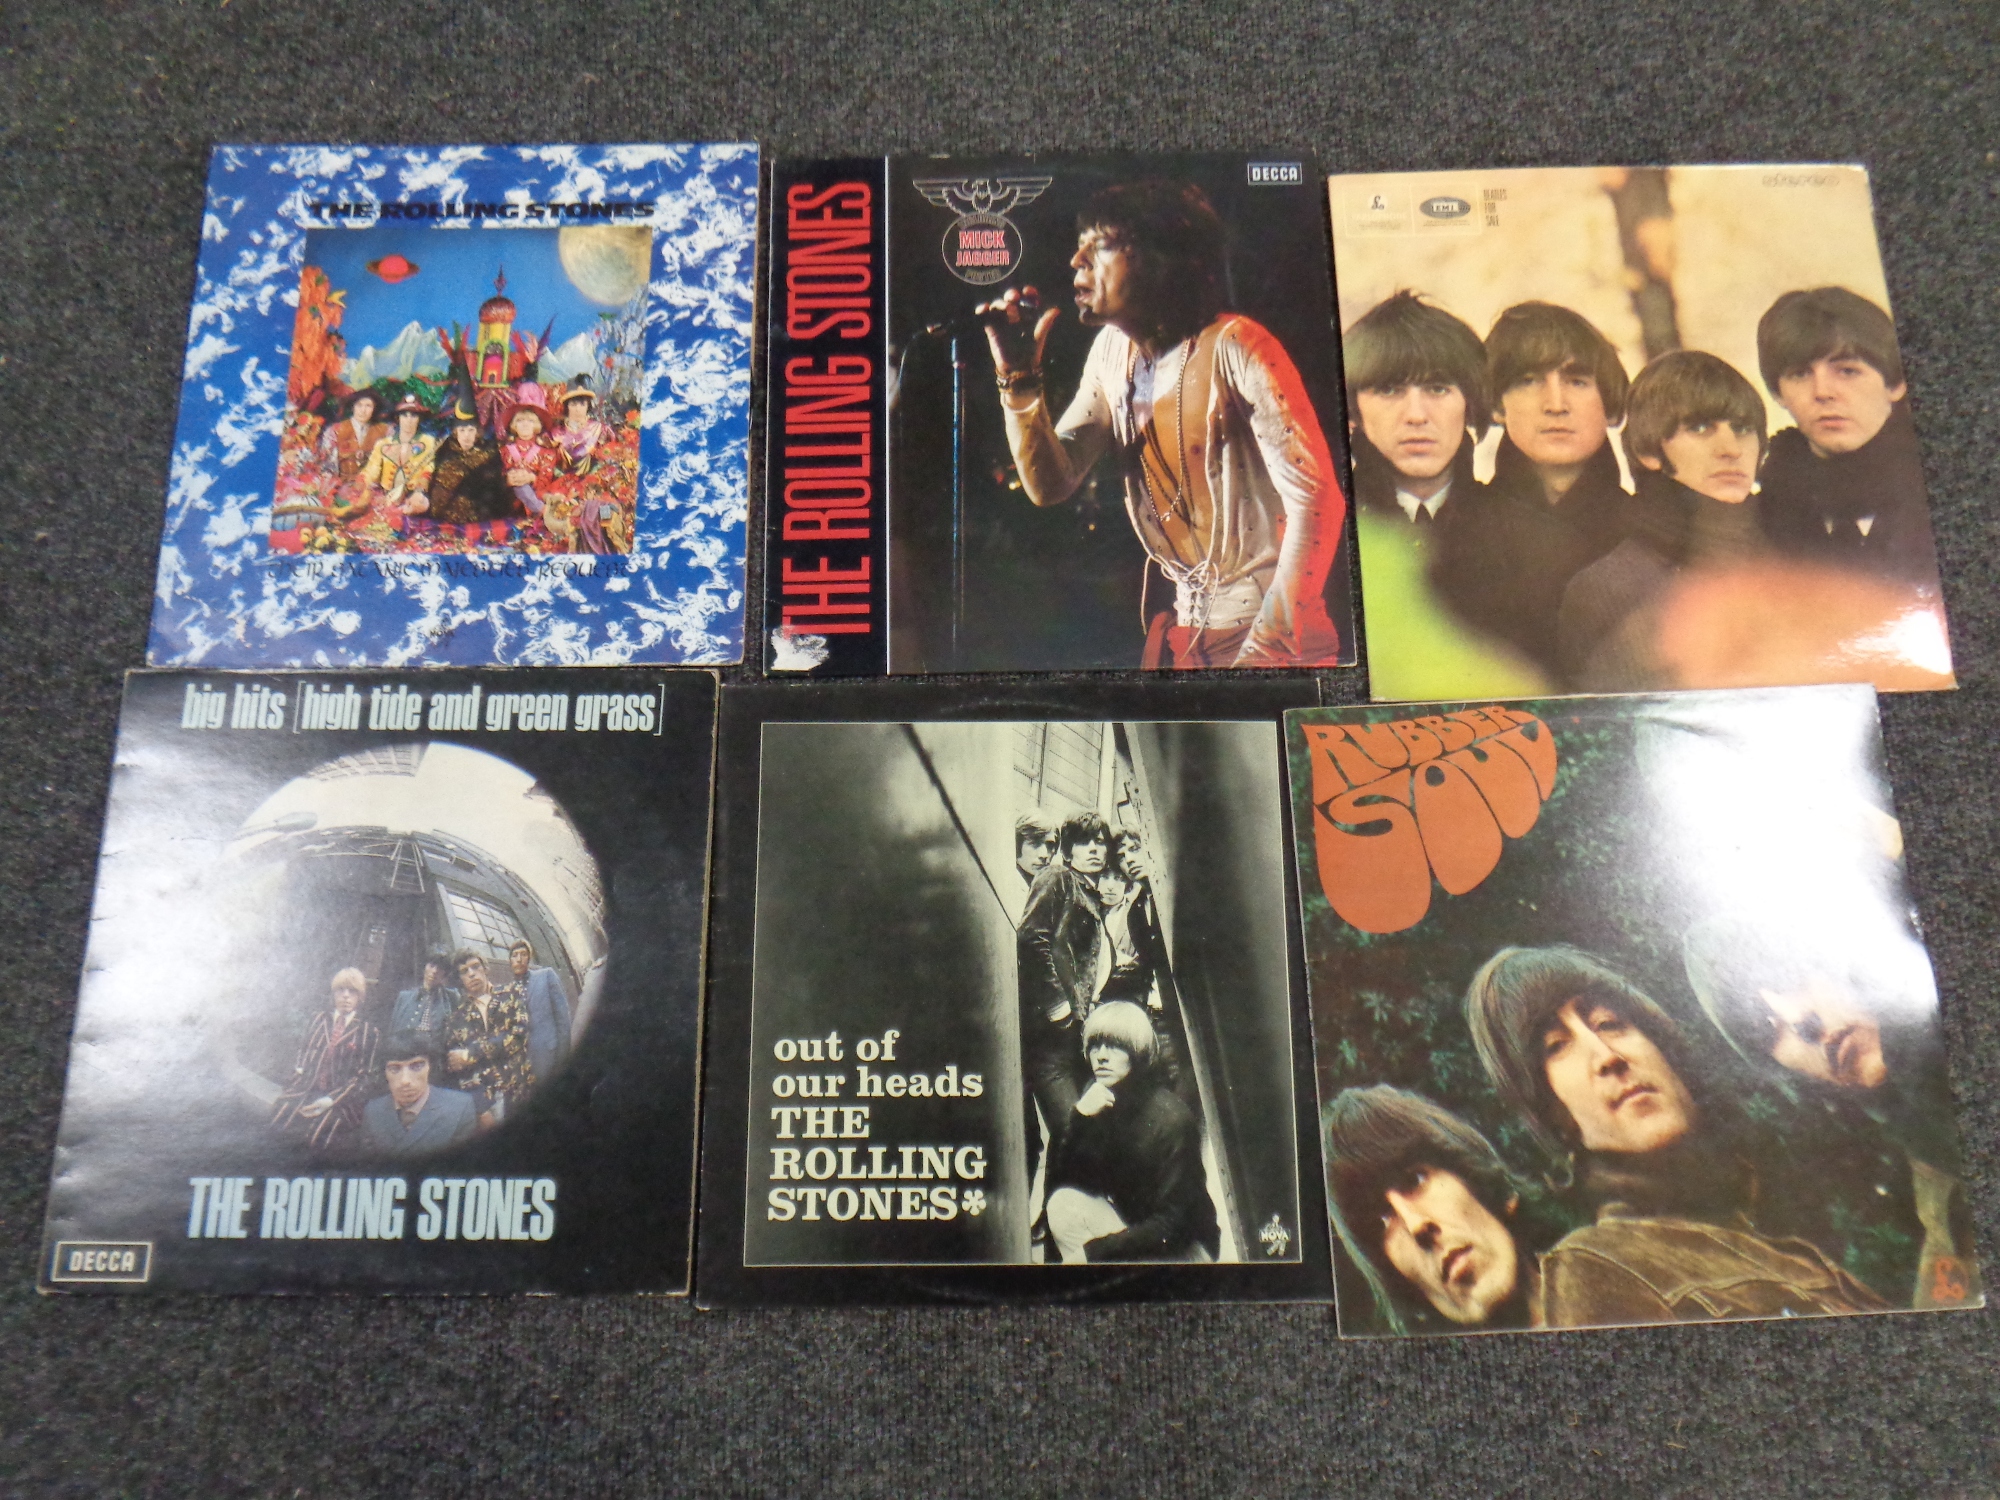 A box of a large quantity of vinyl LP's to include many albums by The Beatles, The Rolling Stones, - Image 3 of 9